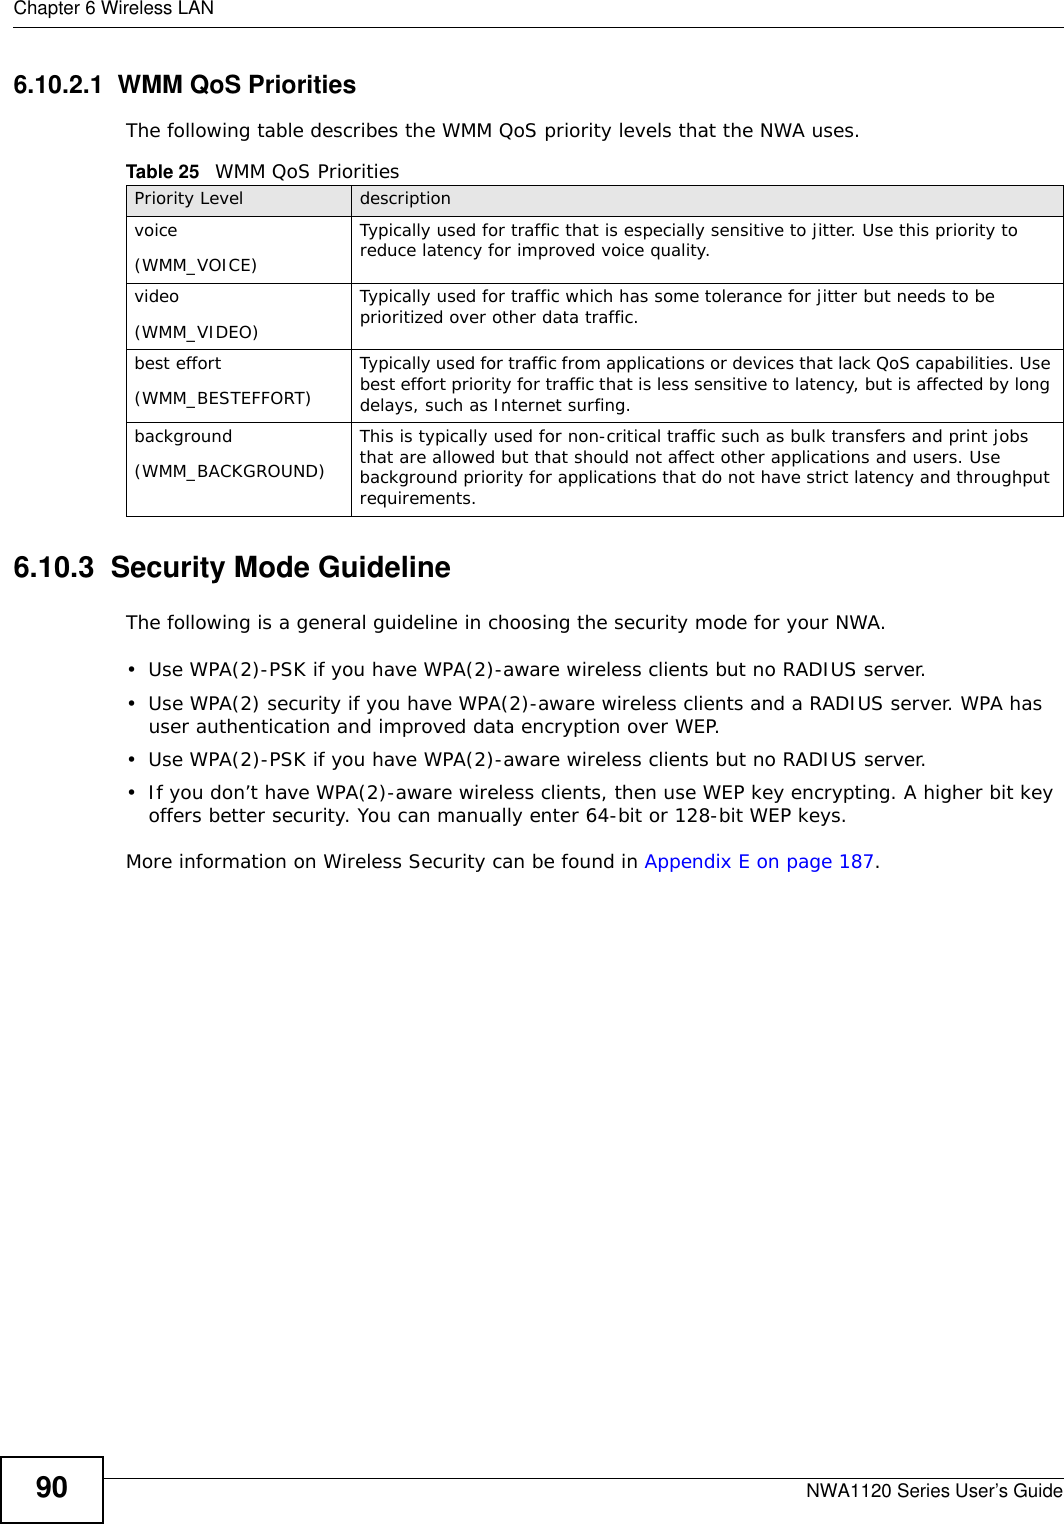 Chapter 6 Wireless LANNWA1120 Series User’s Guide906.10.2.1  WMM QoS PrioritiesThe following table describes the WMM QoS priority levels that the NWA uses.6.10.3  Security Mode GuidelineThe following is a general guideline in choosing the security mode for your NWA. • Use WPA(2)-PSK if you have WPA(2)-aware wireless clients but no RADIUS server.• Use WPA(2) security if you have WPA(2)-aware wireless clients and a RADIUS server. WPA has user authentication and improved data encryption over WEP.• Use WPA(2)-PSK if you have WPA(2)-aware wireless clients but no RADIUS server.    • If you don’t have WPA(2)-aware wireless clients, then use WEP key encrypting. A higher bit key offers better security. You can manually enter 64-bit or 128-bit WEP keys.More information on Wireless Security can be found in Appendix E on page 187. Table 25   WMM QoS PrioritiesPriority Level descriptionvoice(WMM_VOICE)Typically used for traffic that is especially sensitive to jitter. Use this priority to reduce latency for improved voice quality.video(WMM_VIDEO)Typically used for traffic which has some tolerance for jitter but needs to be prioritized over other data traffic.best effort(WMM_BESTEFFORT)Typically used for traffic from applications or devices that lack QoS capabilities. Use best effort priority for traffic that is less sensitive to latency, but is affected by long delays, such as Internet surfing.background(WMM_BACKGROUND)This is typically used for non-critical traffic such as bulk transfers and print jobs that are allowed but that should not affect other applications and users. Use background priority for applications that do not have strict latency and throughput requirements.